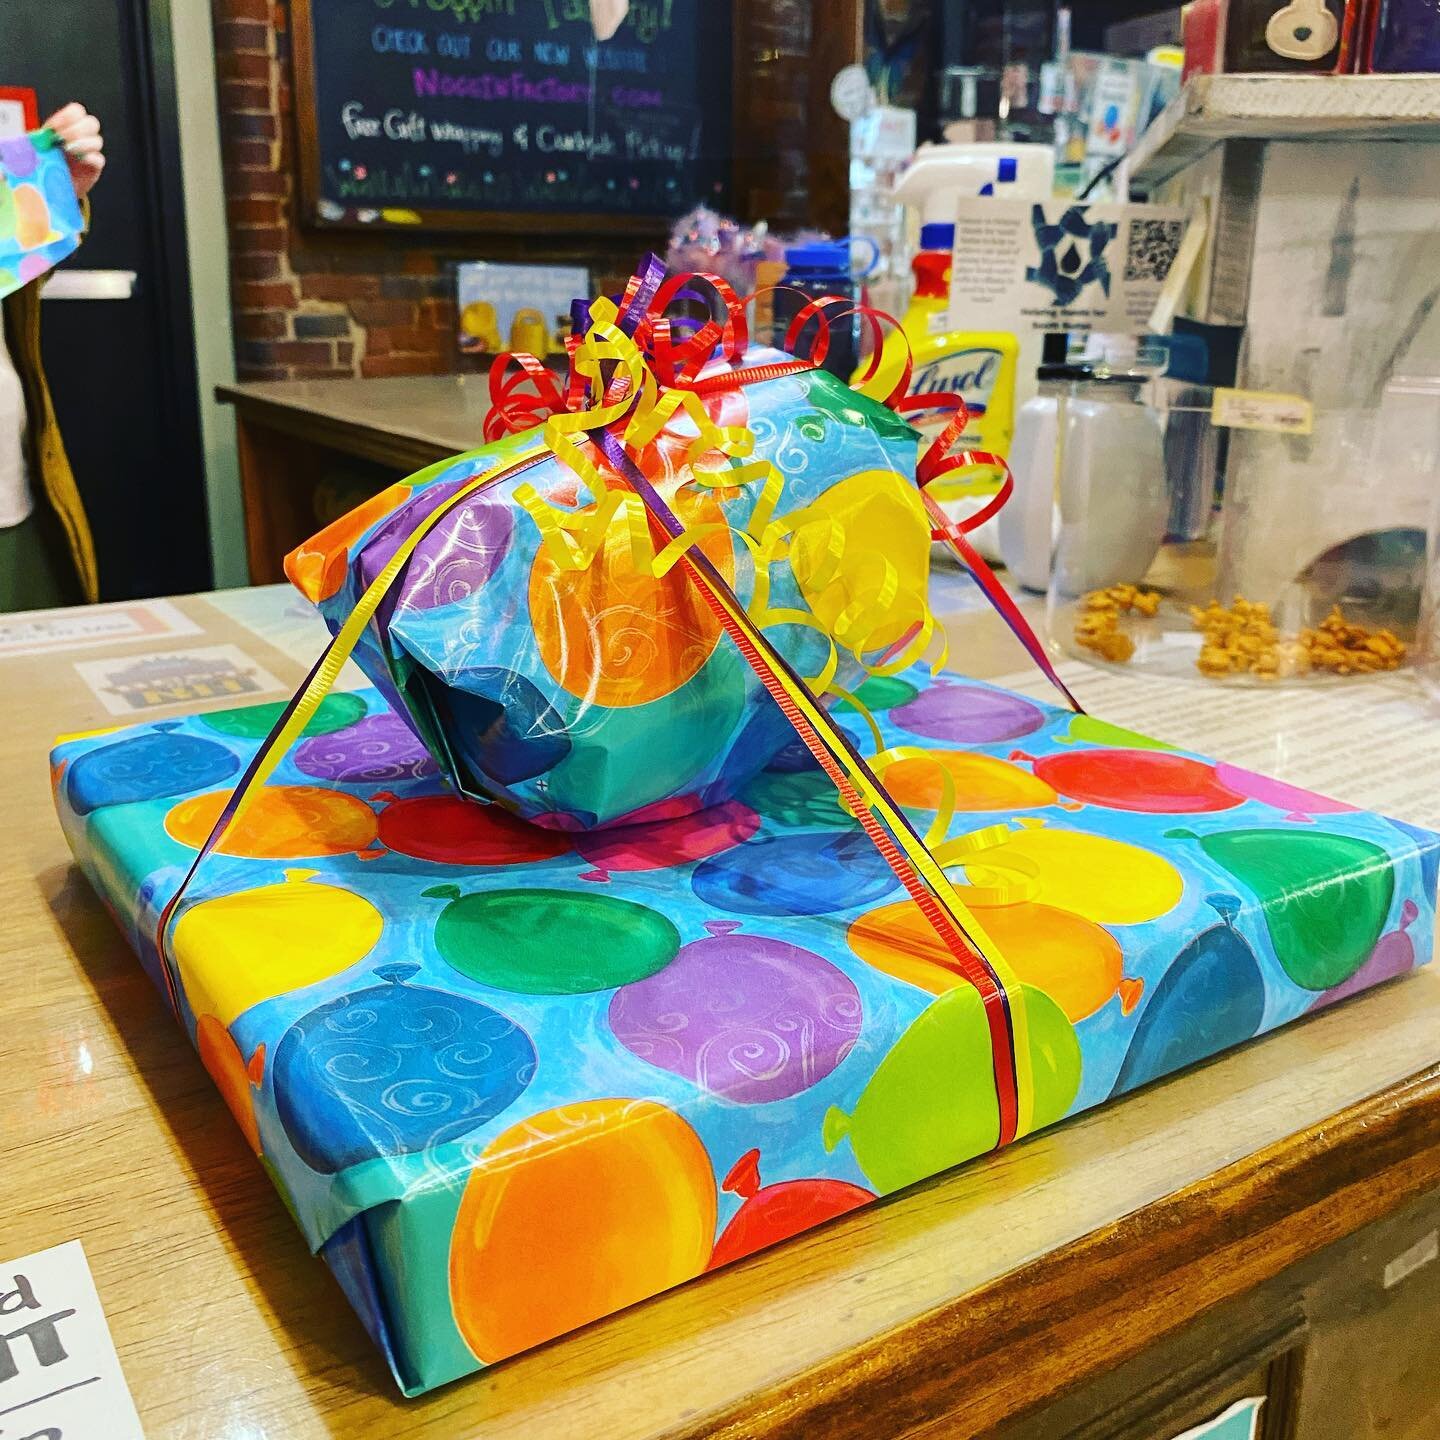 If it&rsquo;s a Saturday morning and you don&rsquo;t stop at @noggin_factory for a present on the way to the birthday party because they offer complimentary gift wrapping&hellip;are you even a Dover mom? 😂😂

#dovermoms #seacoastmoms #seacoastbabies